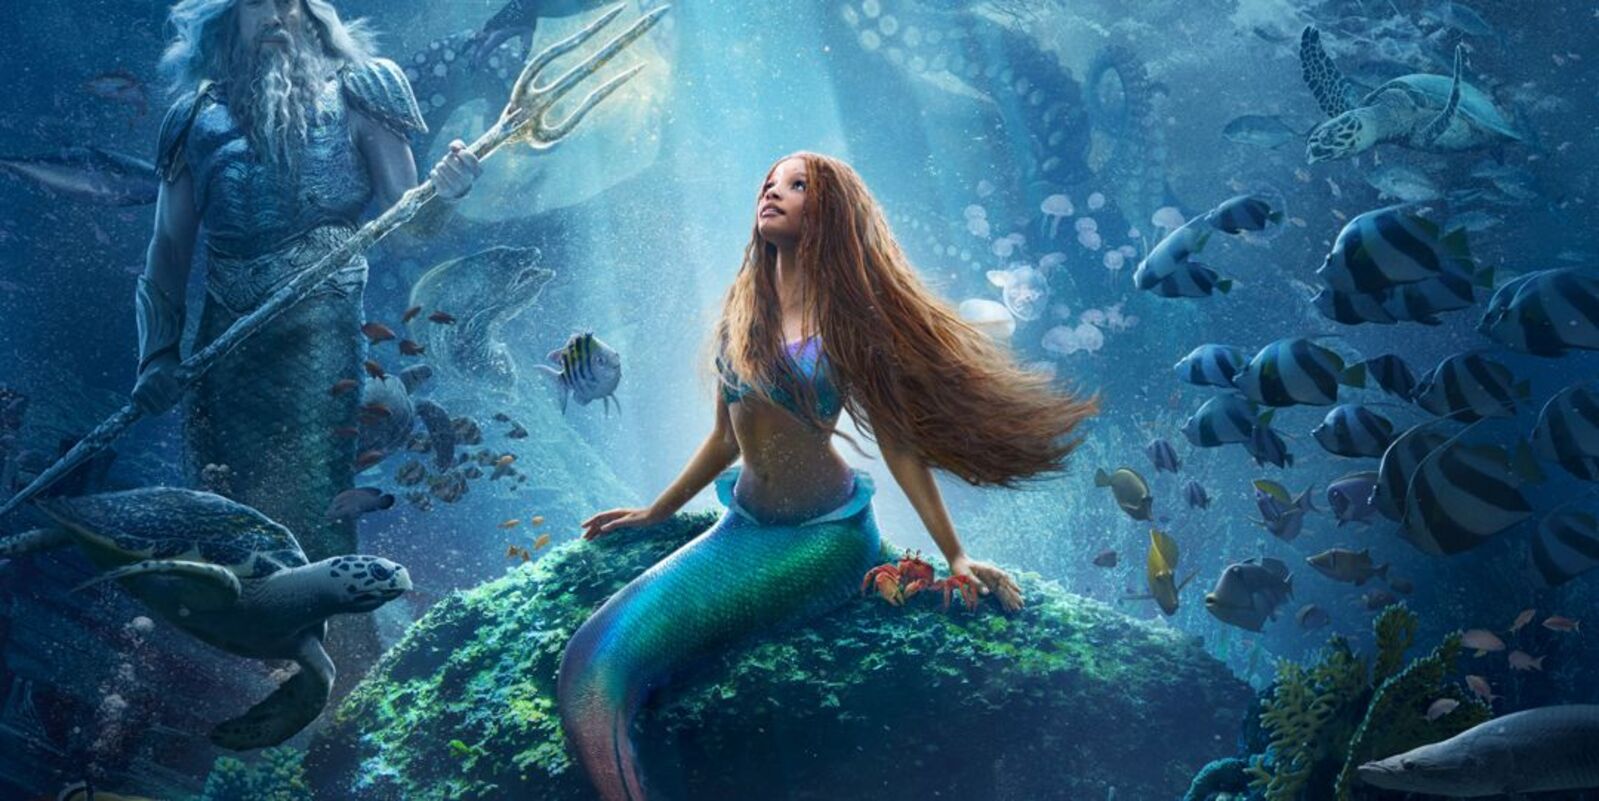 The Little Mermaid, here you are Ariel and her sisters in the new photos from the live-action Disney